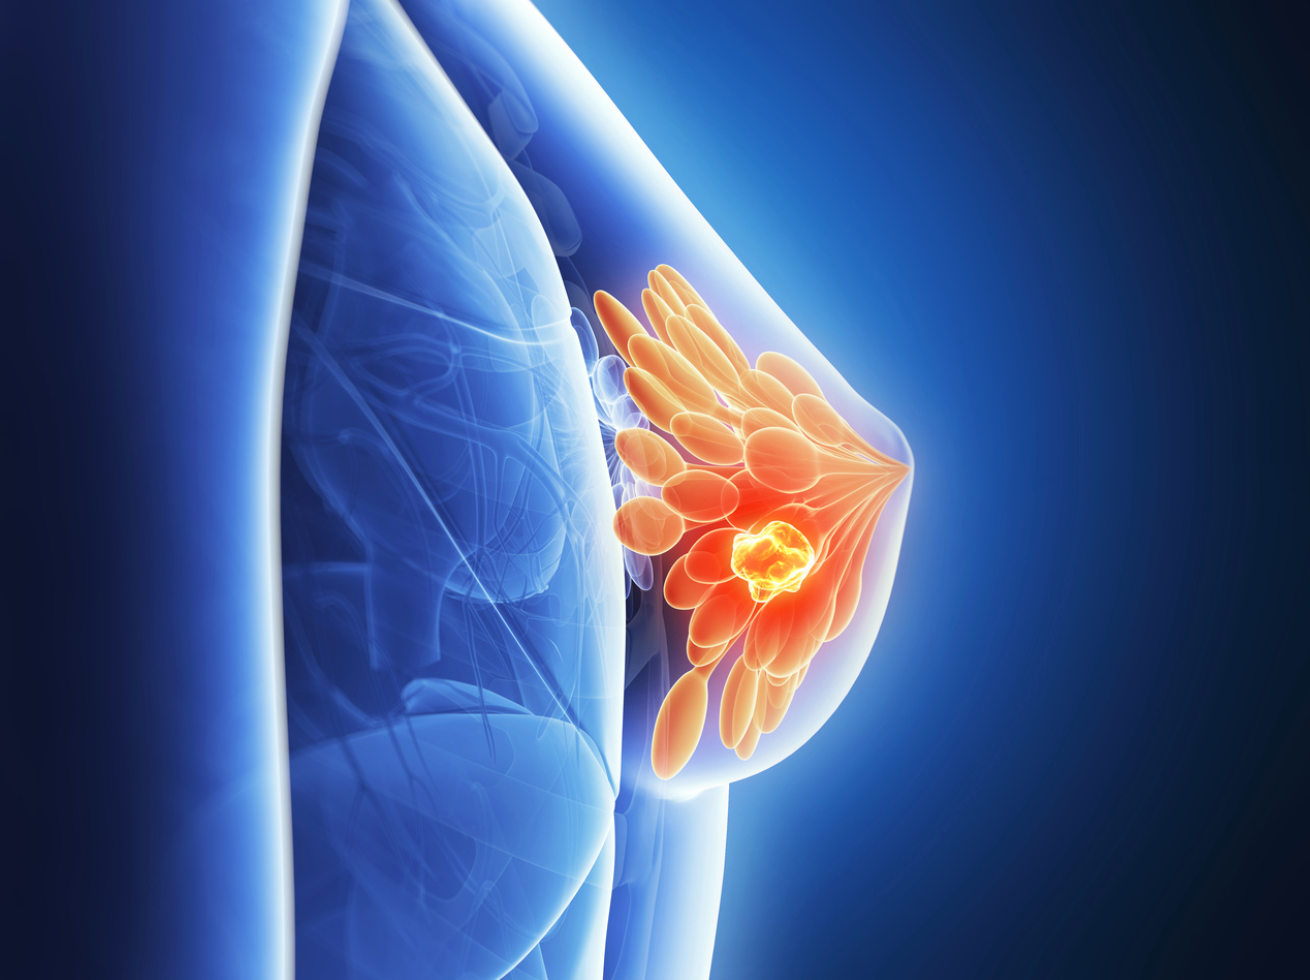 Study: Alpelisib Plus Endocrine Therapy Effective in PIK3CA-mutated, HR+, HER2– Advanced Breast Cancer